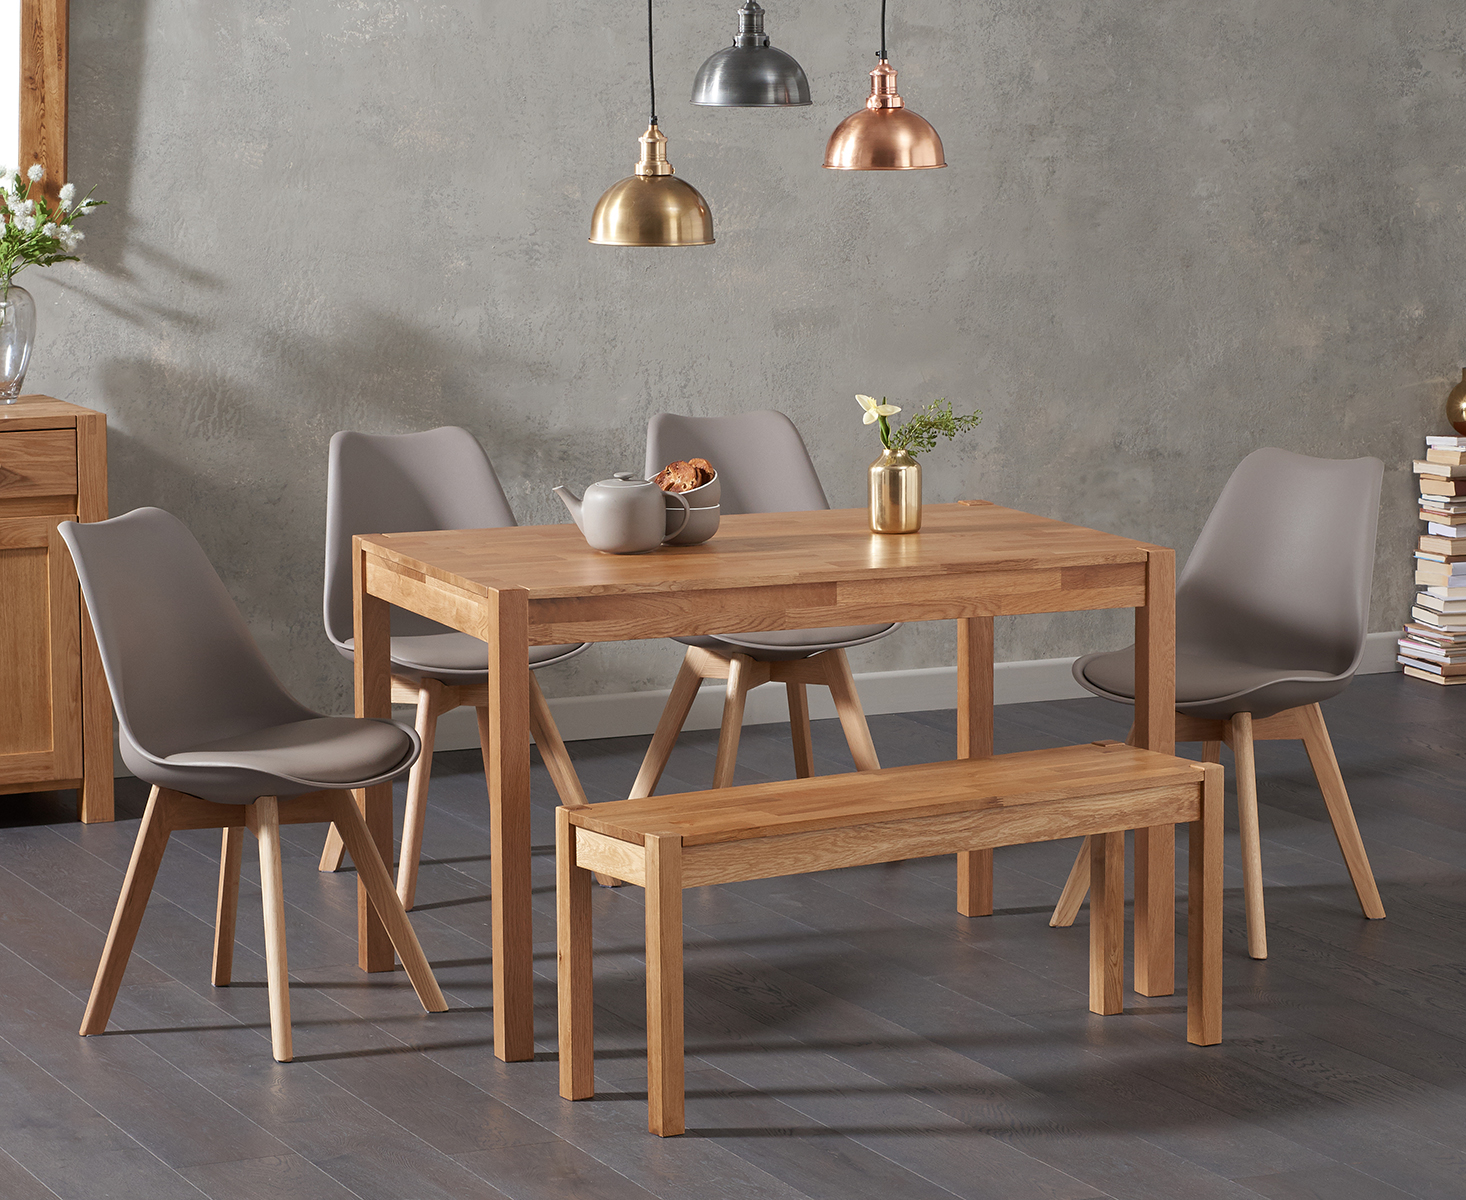 York 120cm Solid Oak Dining Table With 4 Mink Orson Faux Leather Chairs And 1 York Bench